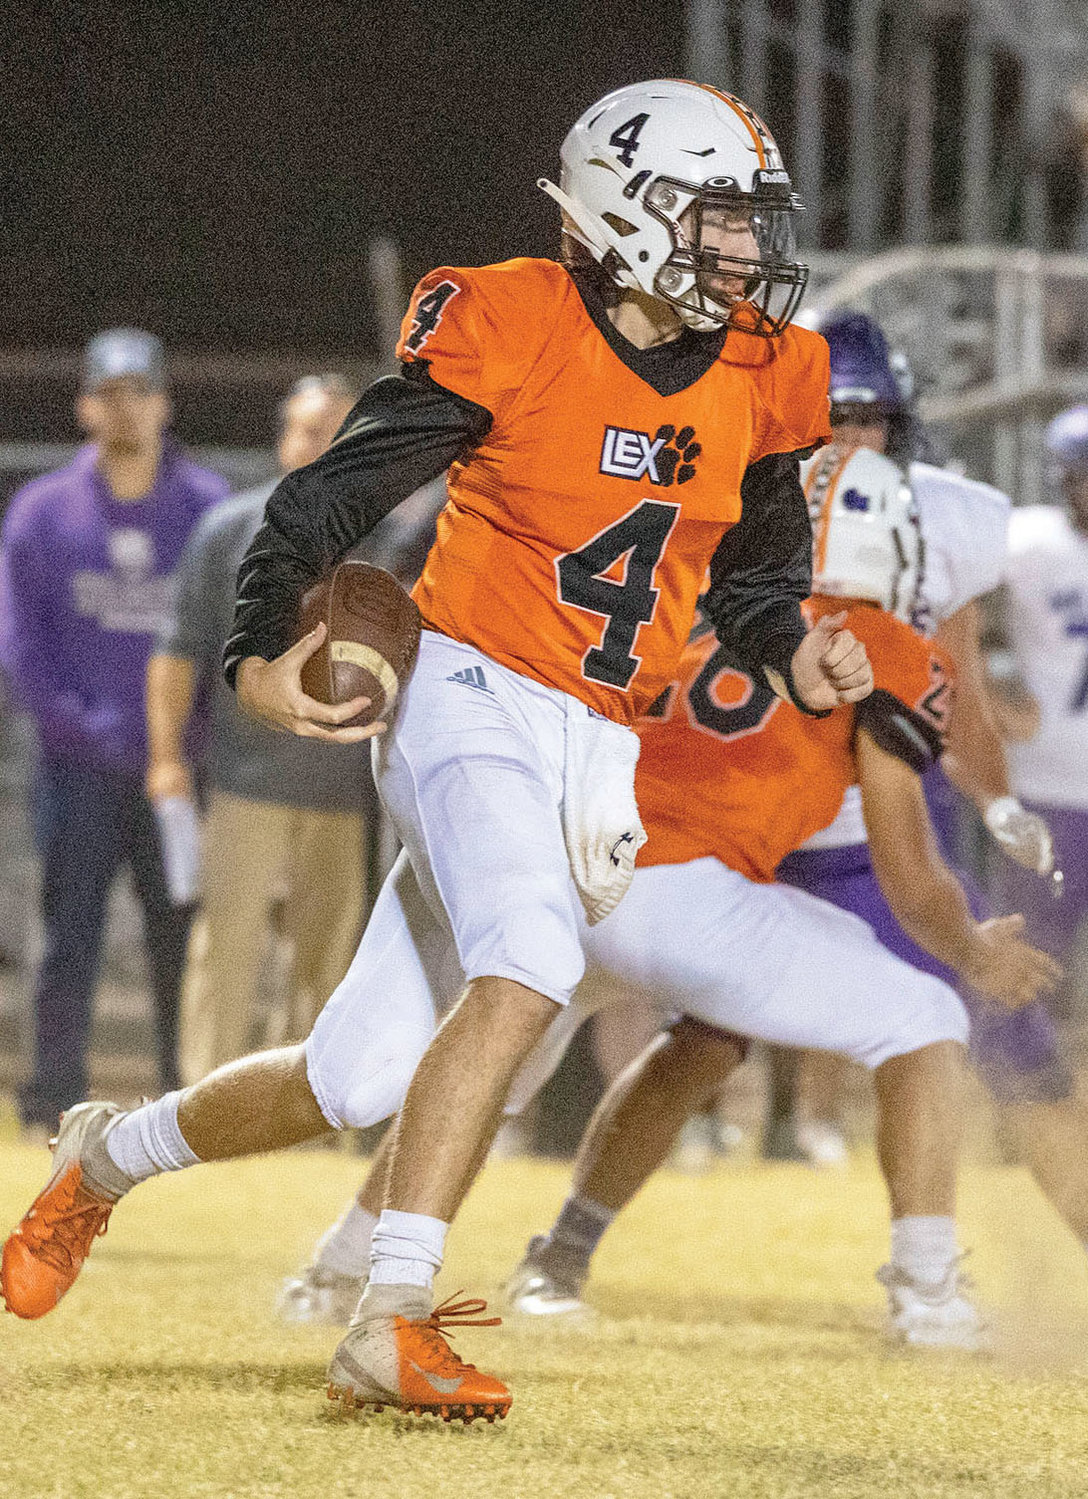 Lexington senior Tate Collier rushes the football against Coalgate Friday night. The Bulldogs were defeated 28-0. Collier had 142 yards passing on the night.